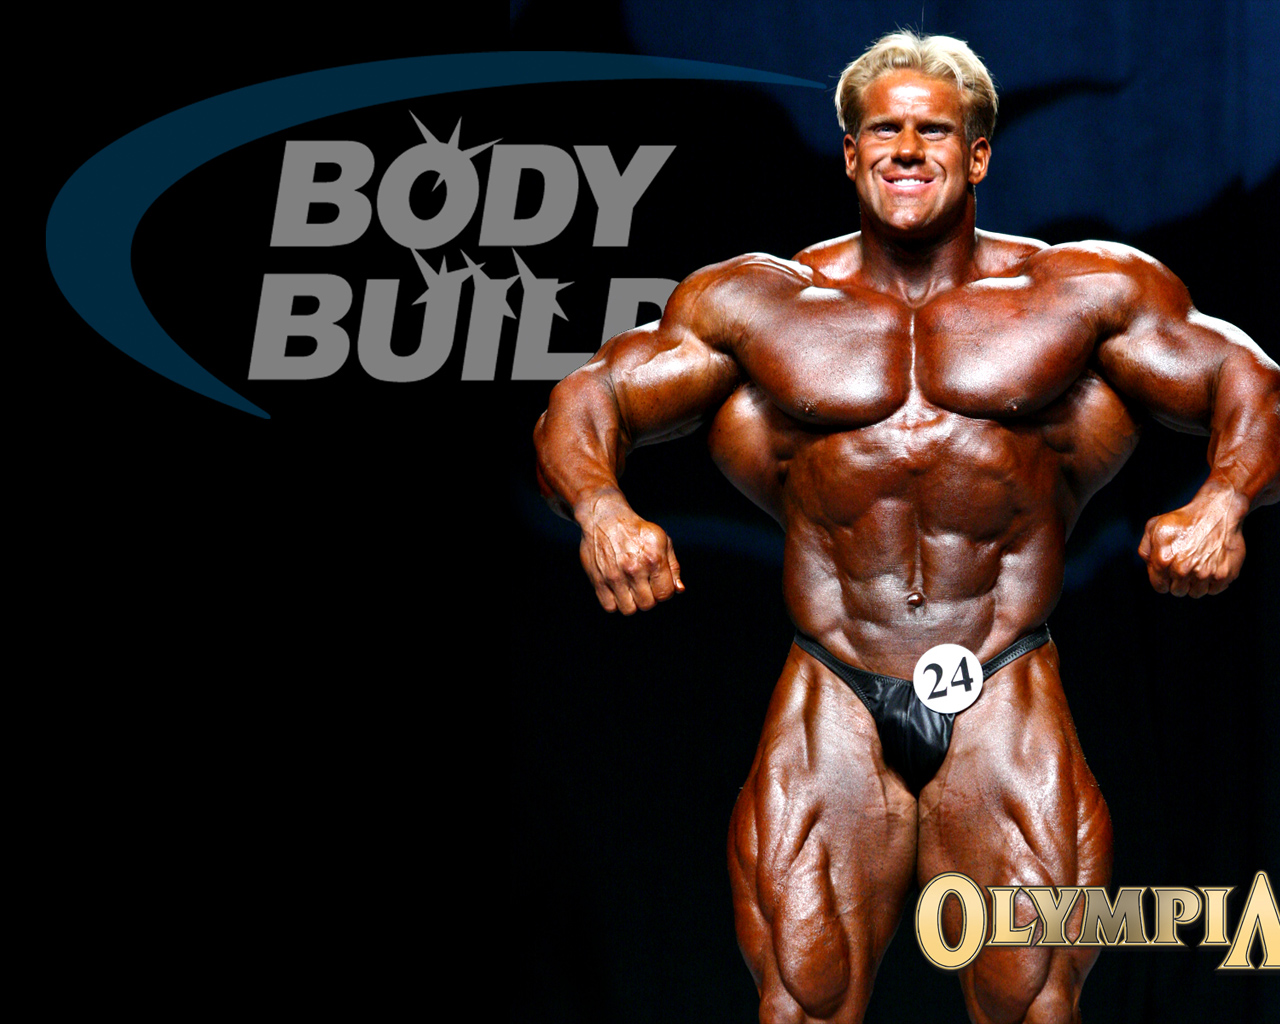 Download High quality Olympia Body Building wallpaper / 1280x1024